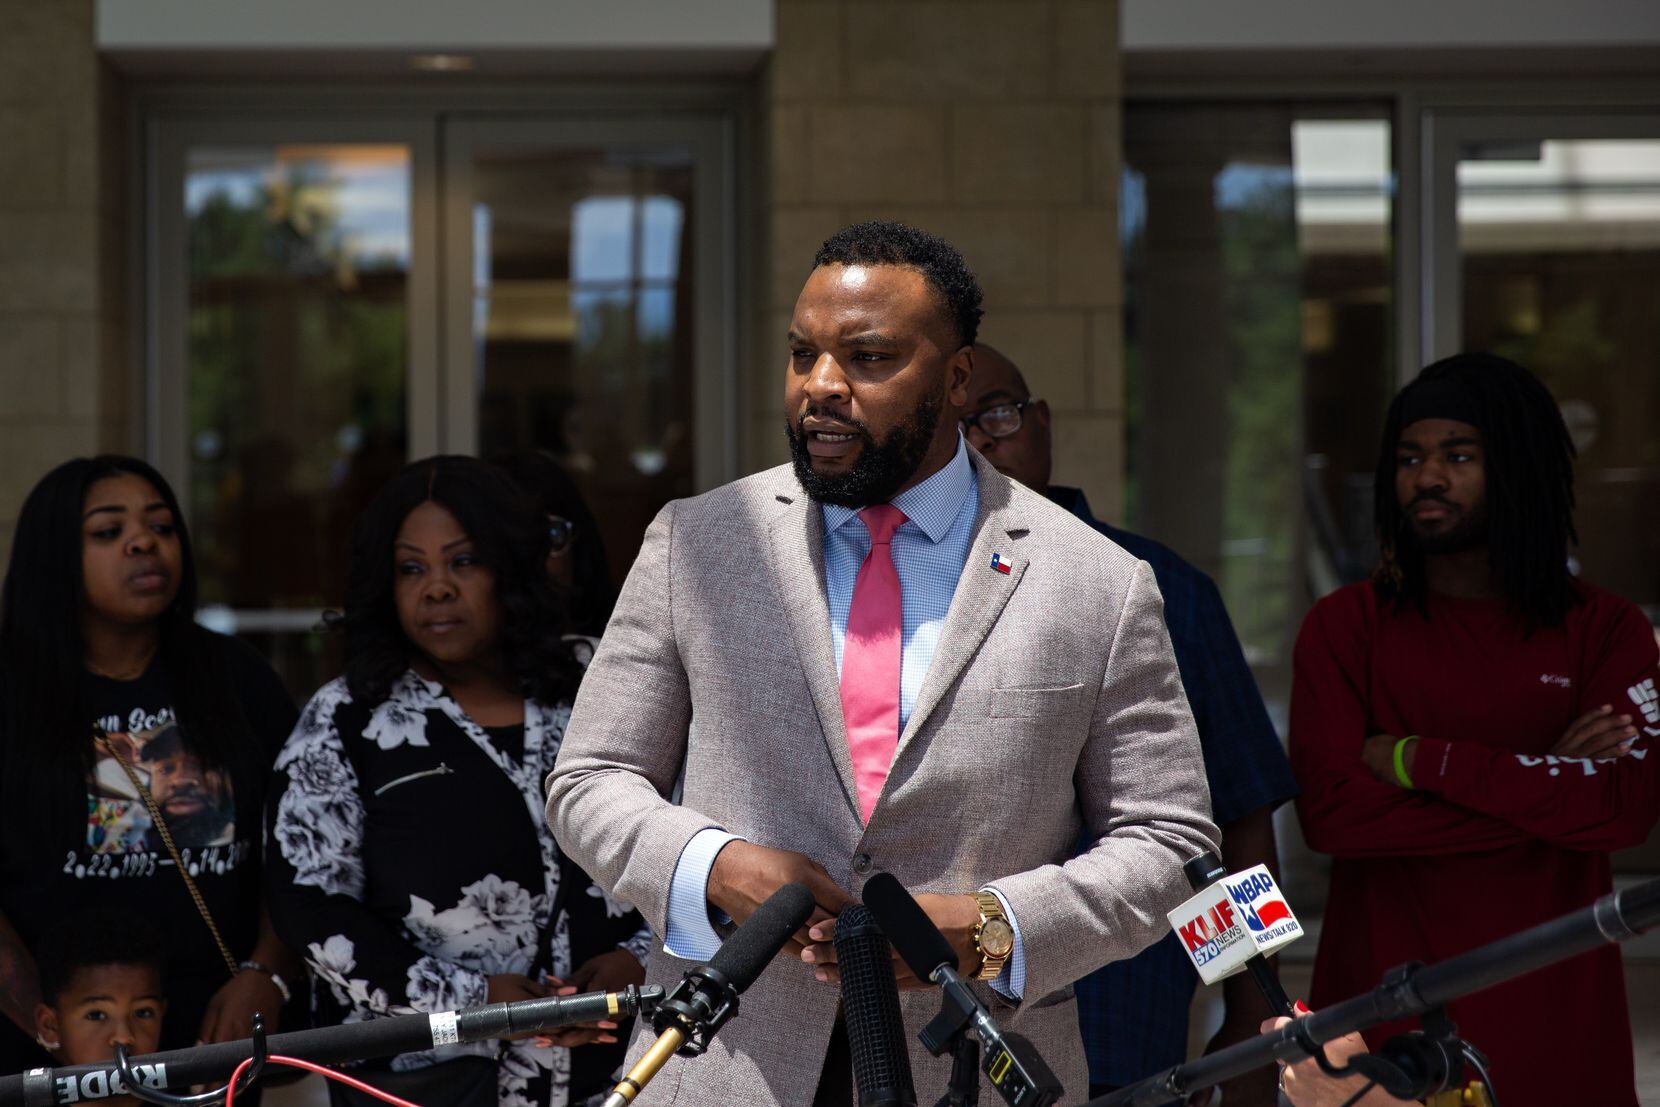 Civil rights lawyer Lee Merritt running for Texas attorney general seat  held by Ken Paxton